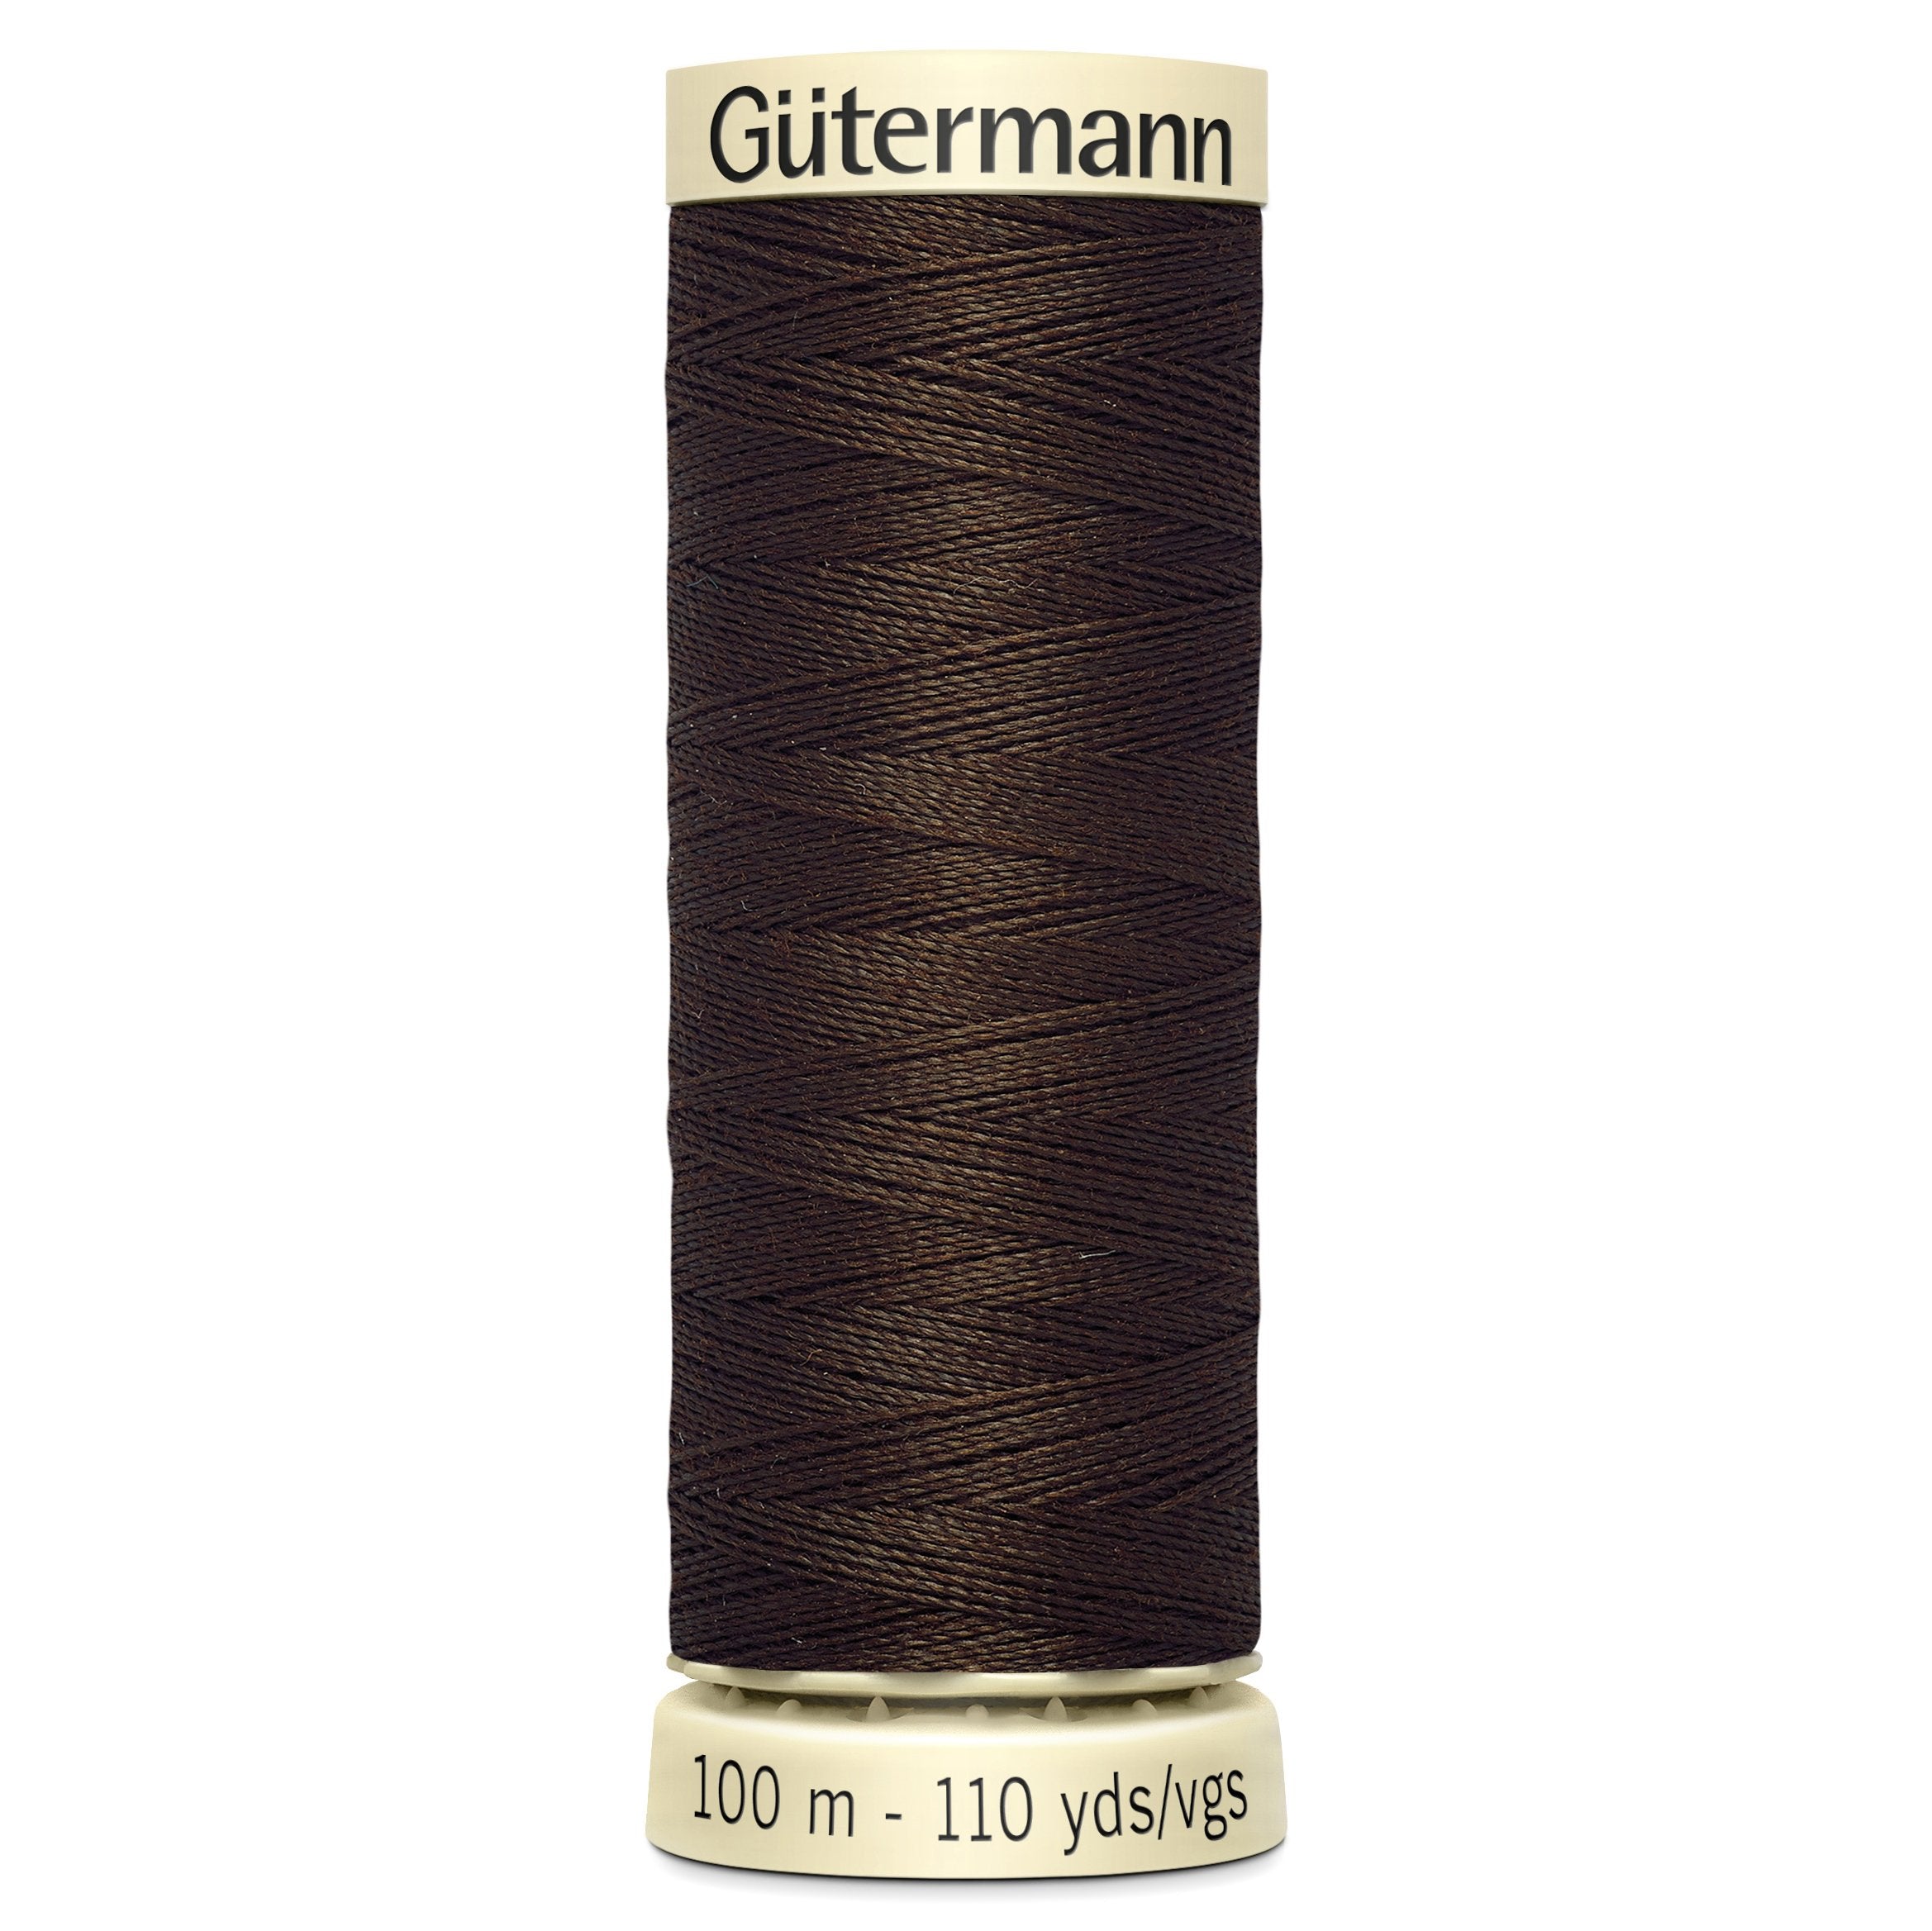 Gutermann Sew All Thread colour 406 Dark Brown from Jaycotts Sewing Supplies